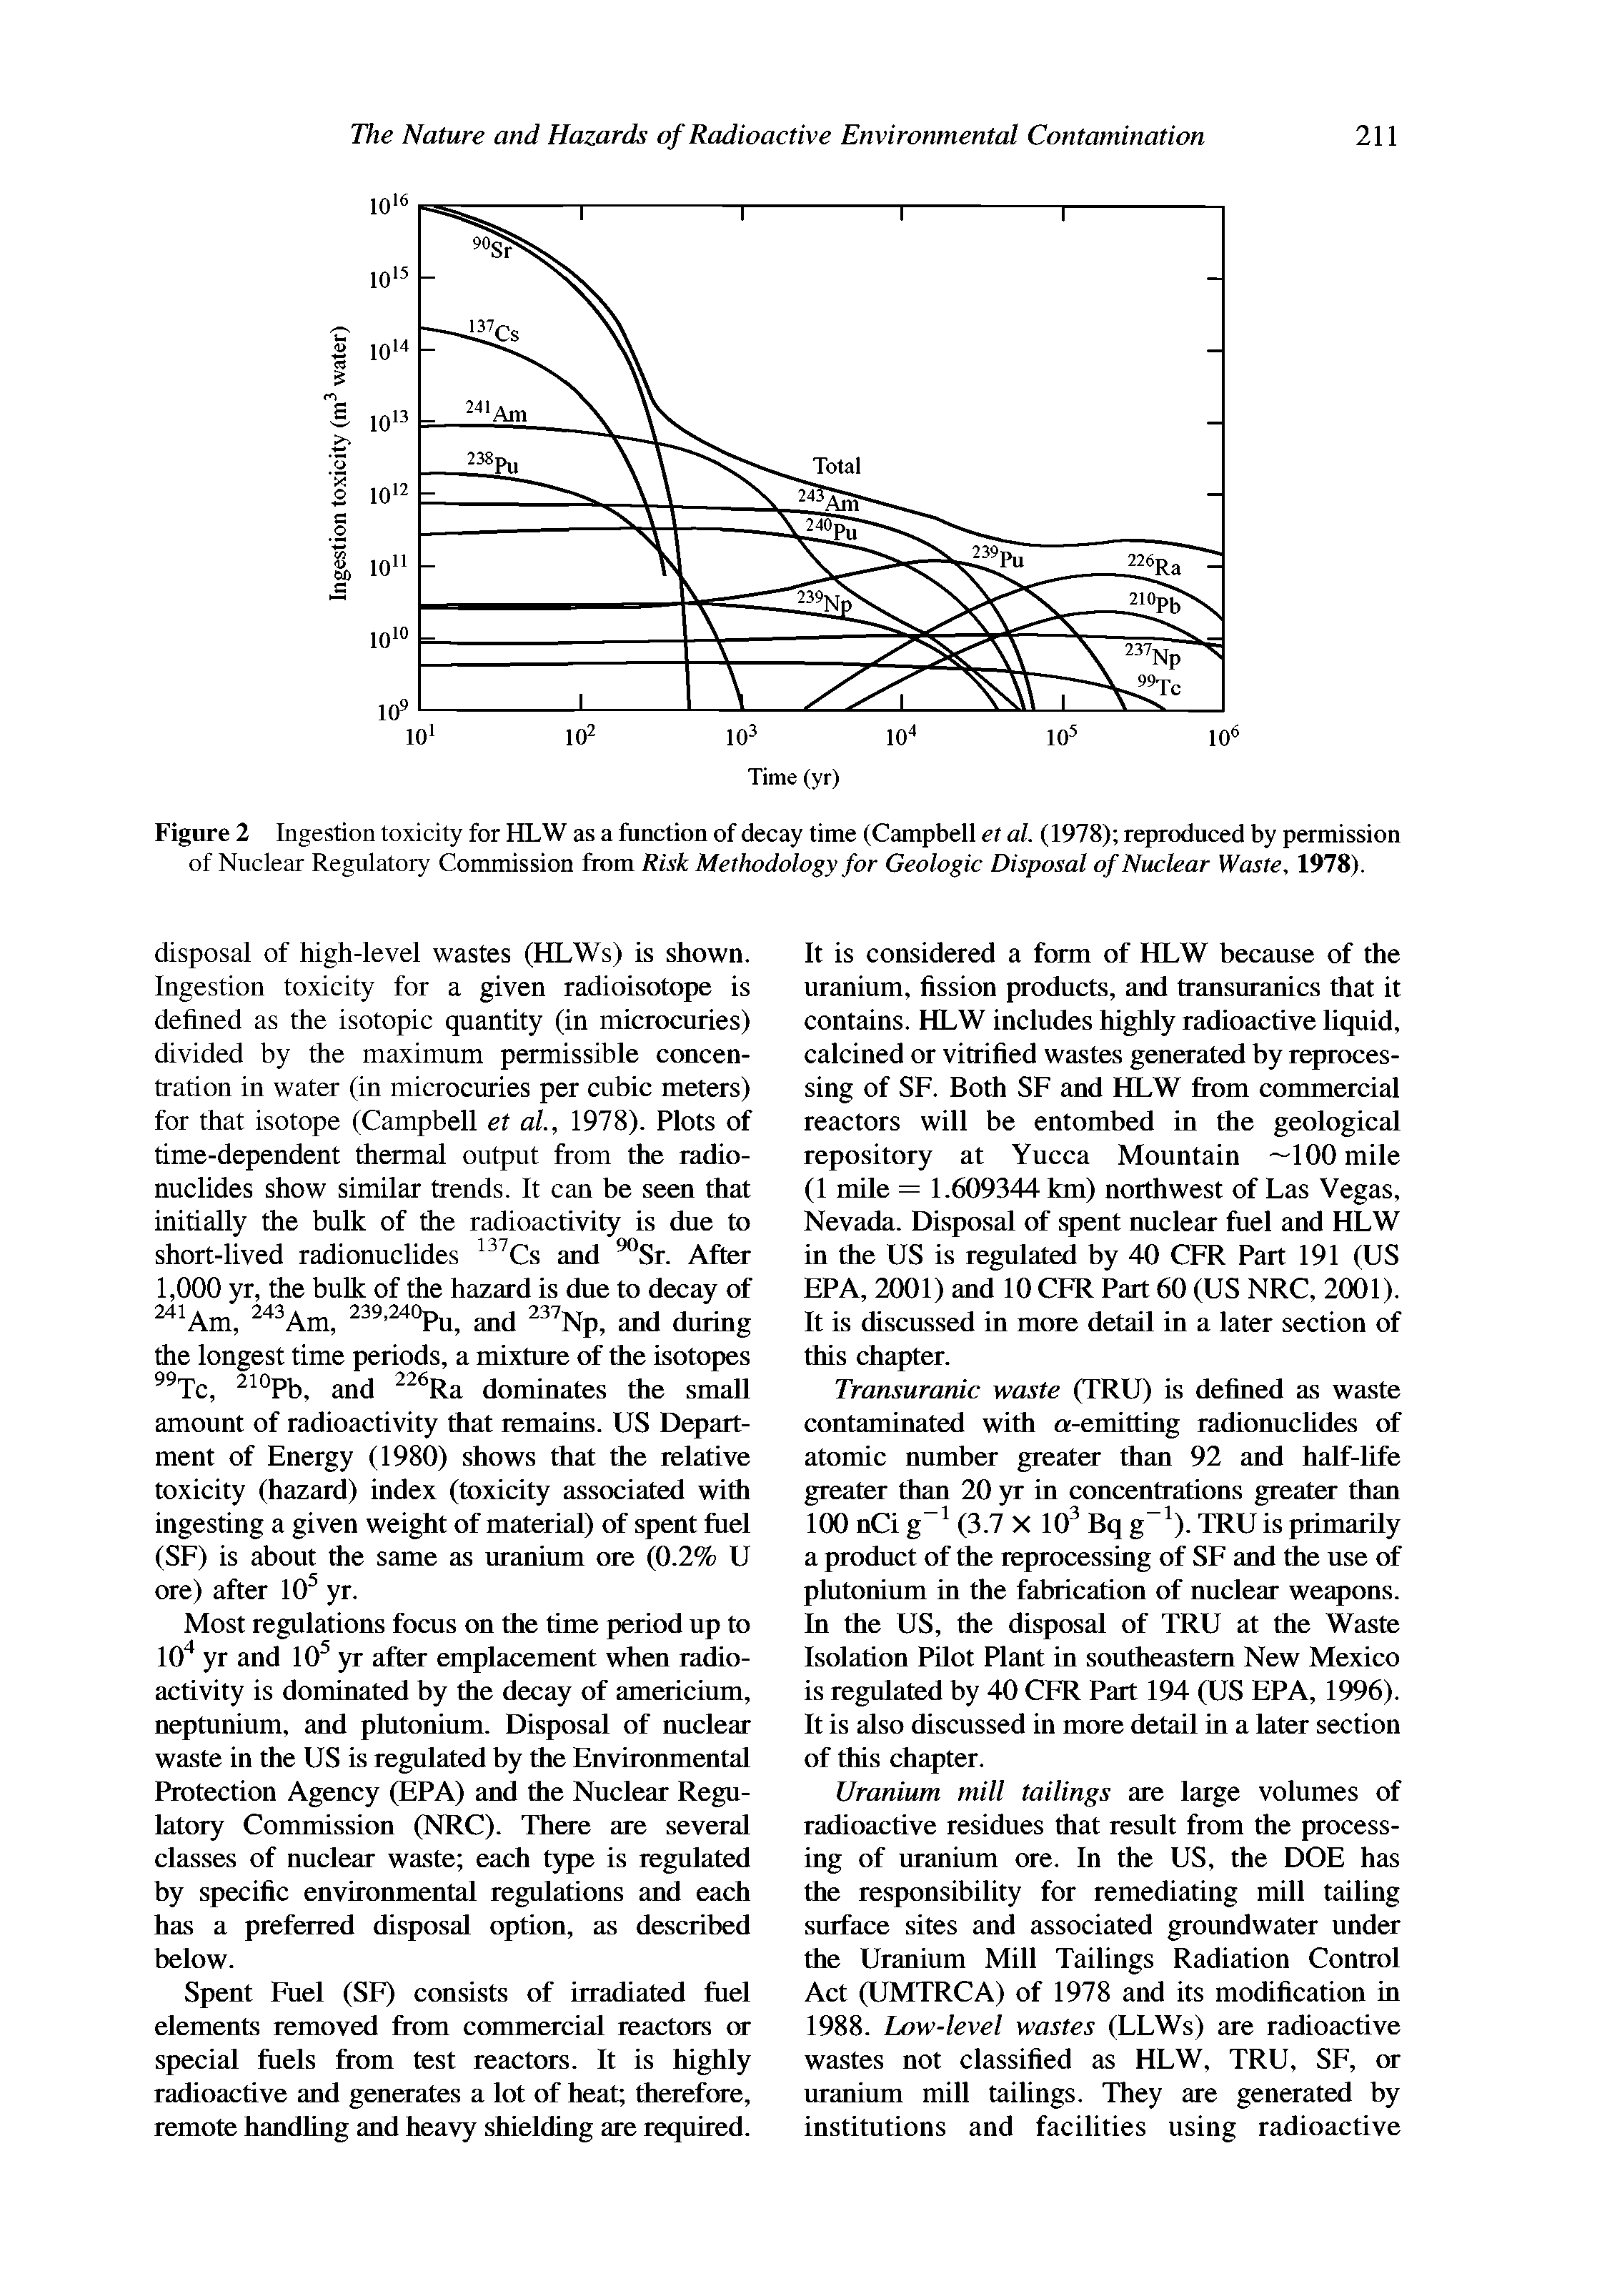 Figure 2 Ingestion toxicity for HLW as a function of decay time (Campbell et al. (1978) reproduced by permission of Nuclear Regulatory Commission from Risk Methodology for Geologic Disposal of Nuclear Waste, 1978).